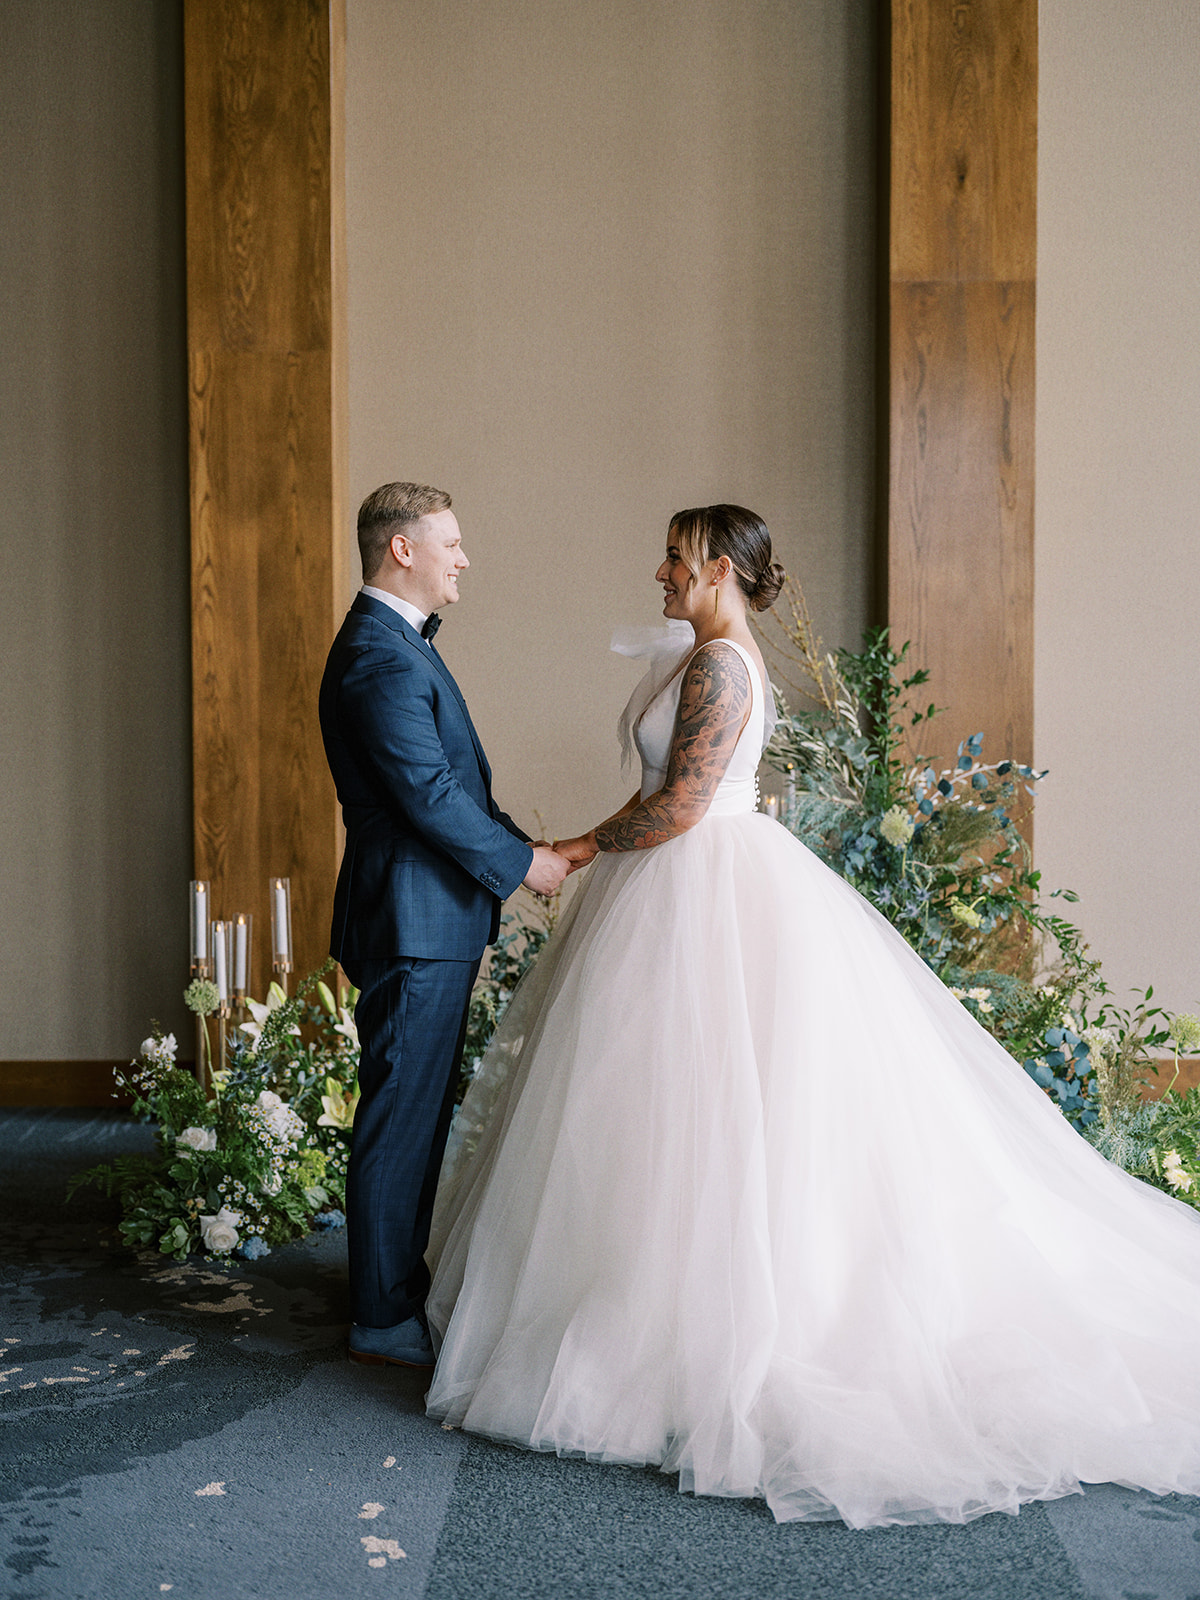 Contemporary and romantic wedding ceremony at The Malcolm Hotel in Canmore, Alberta featuring Mediterranean wedding inspiration.